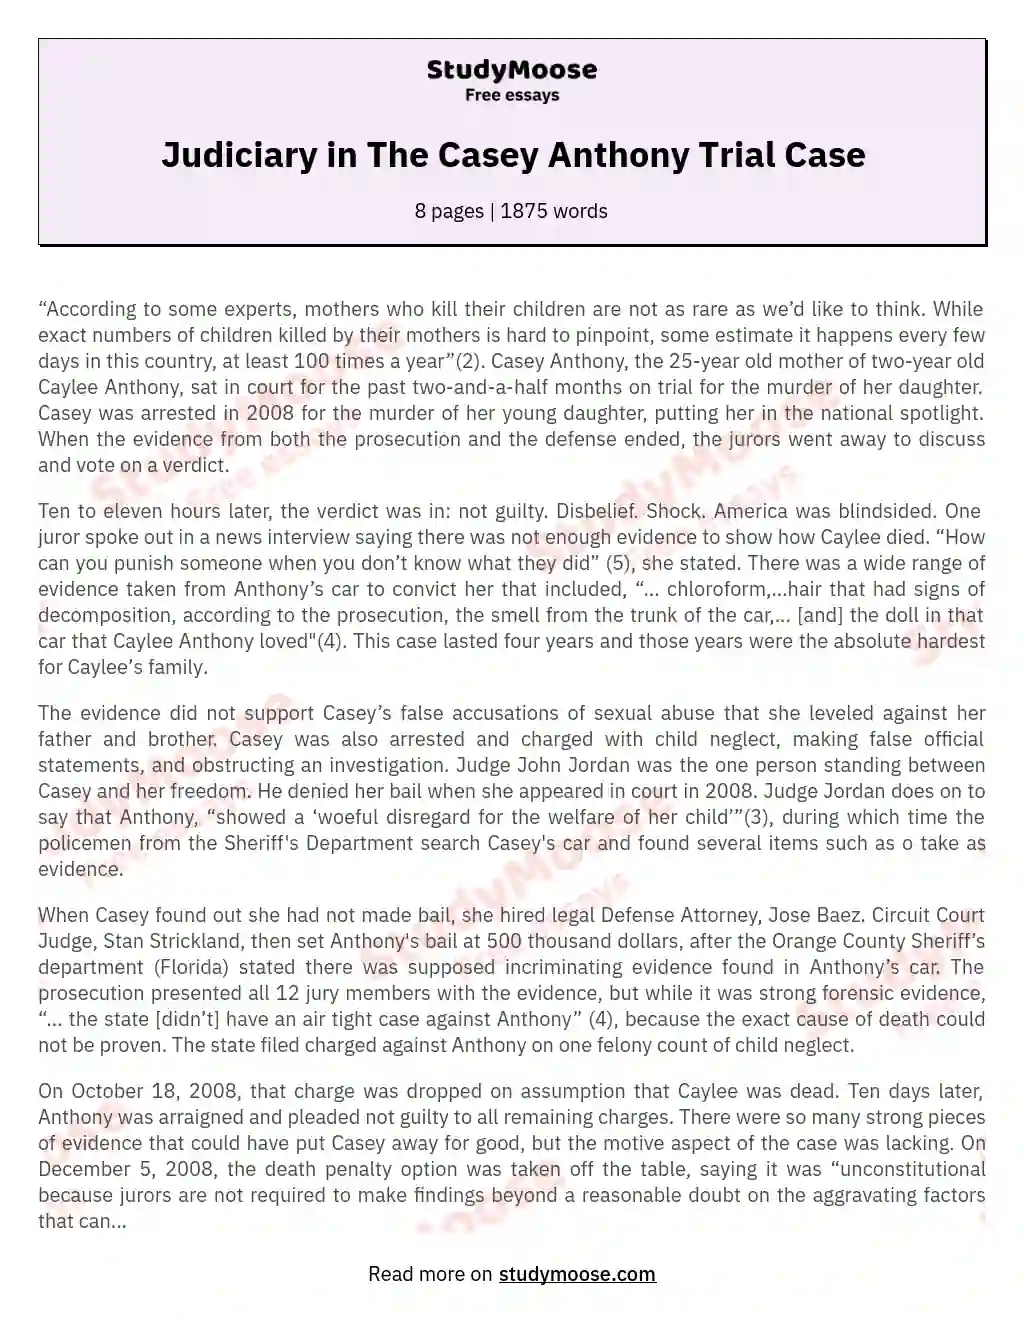 Judiciary in The Casey Anthony Trial Case essay